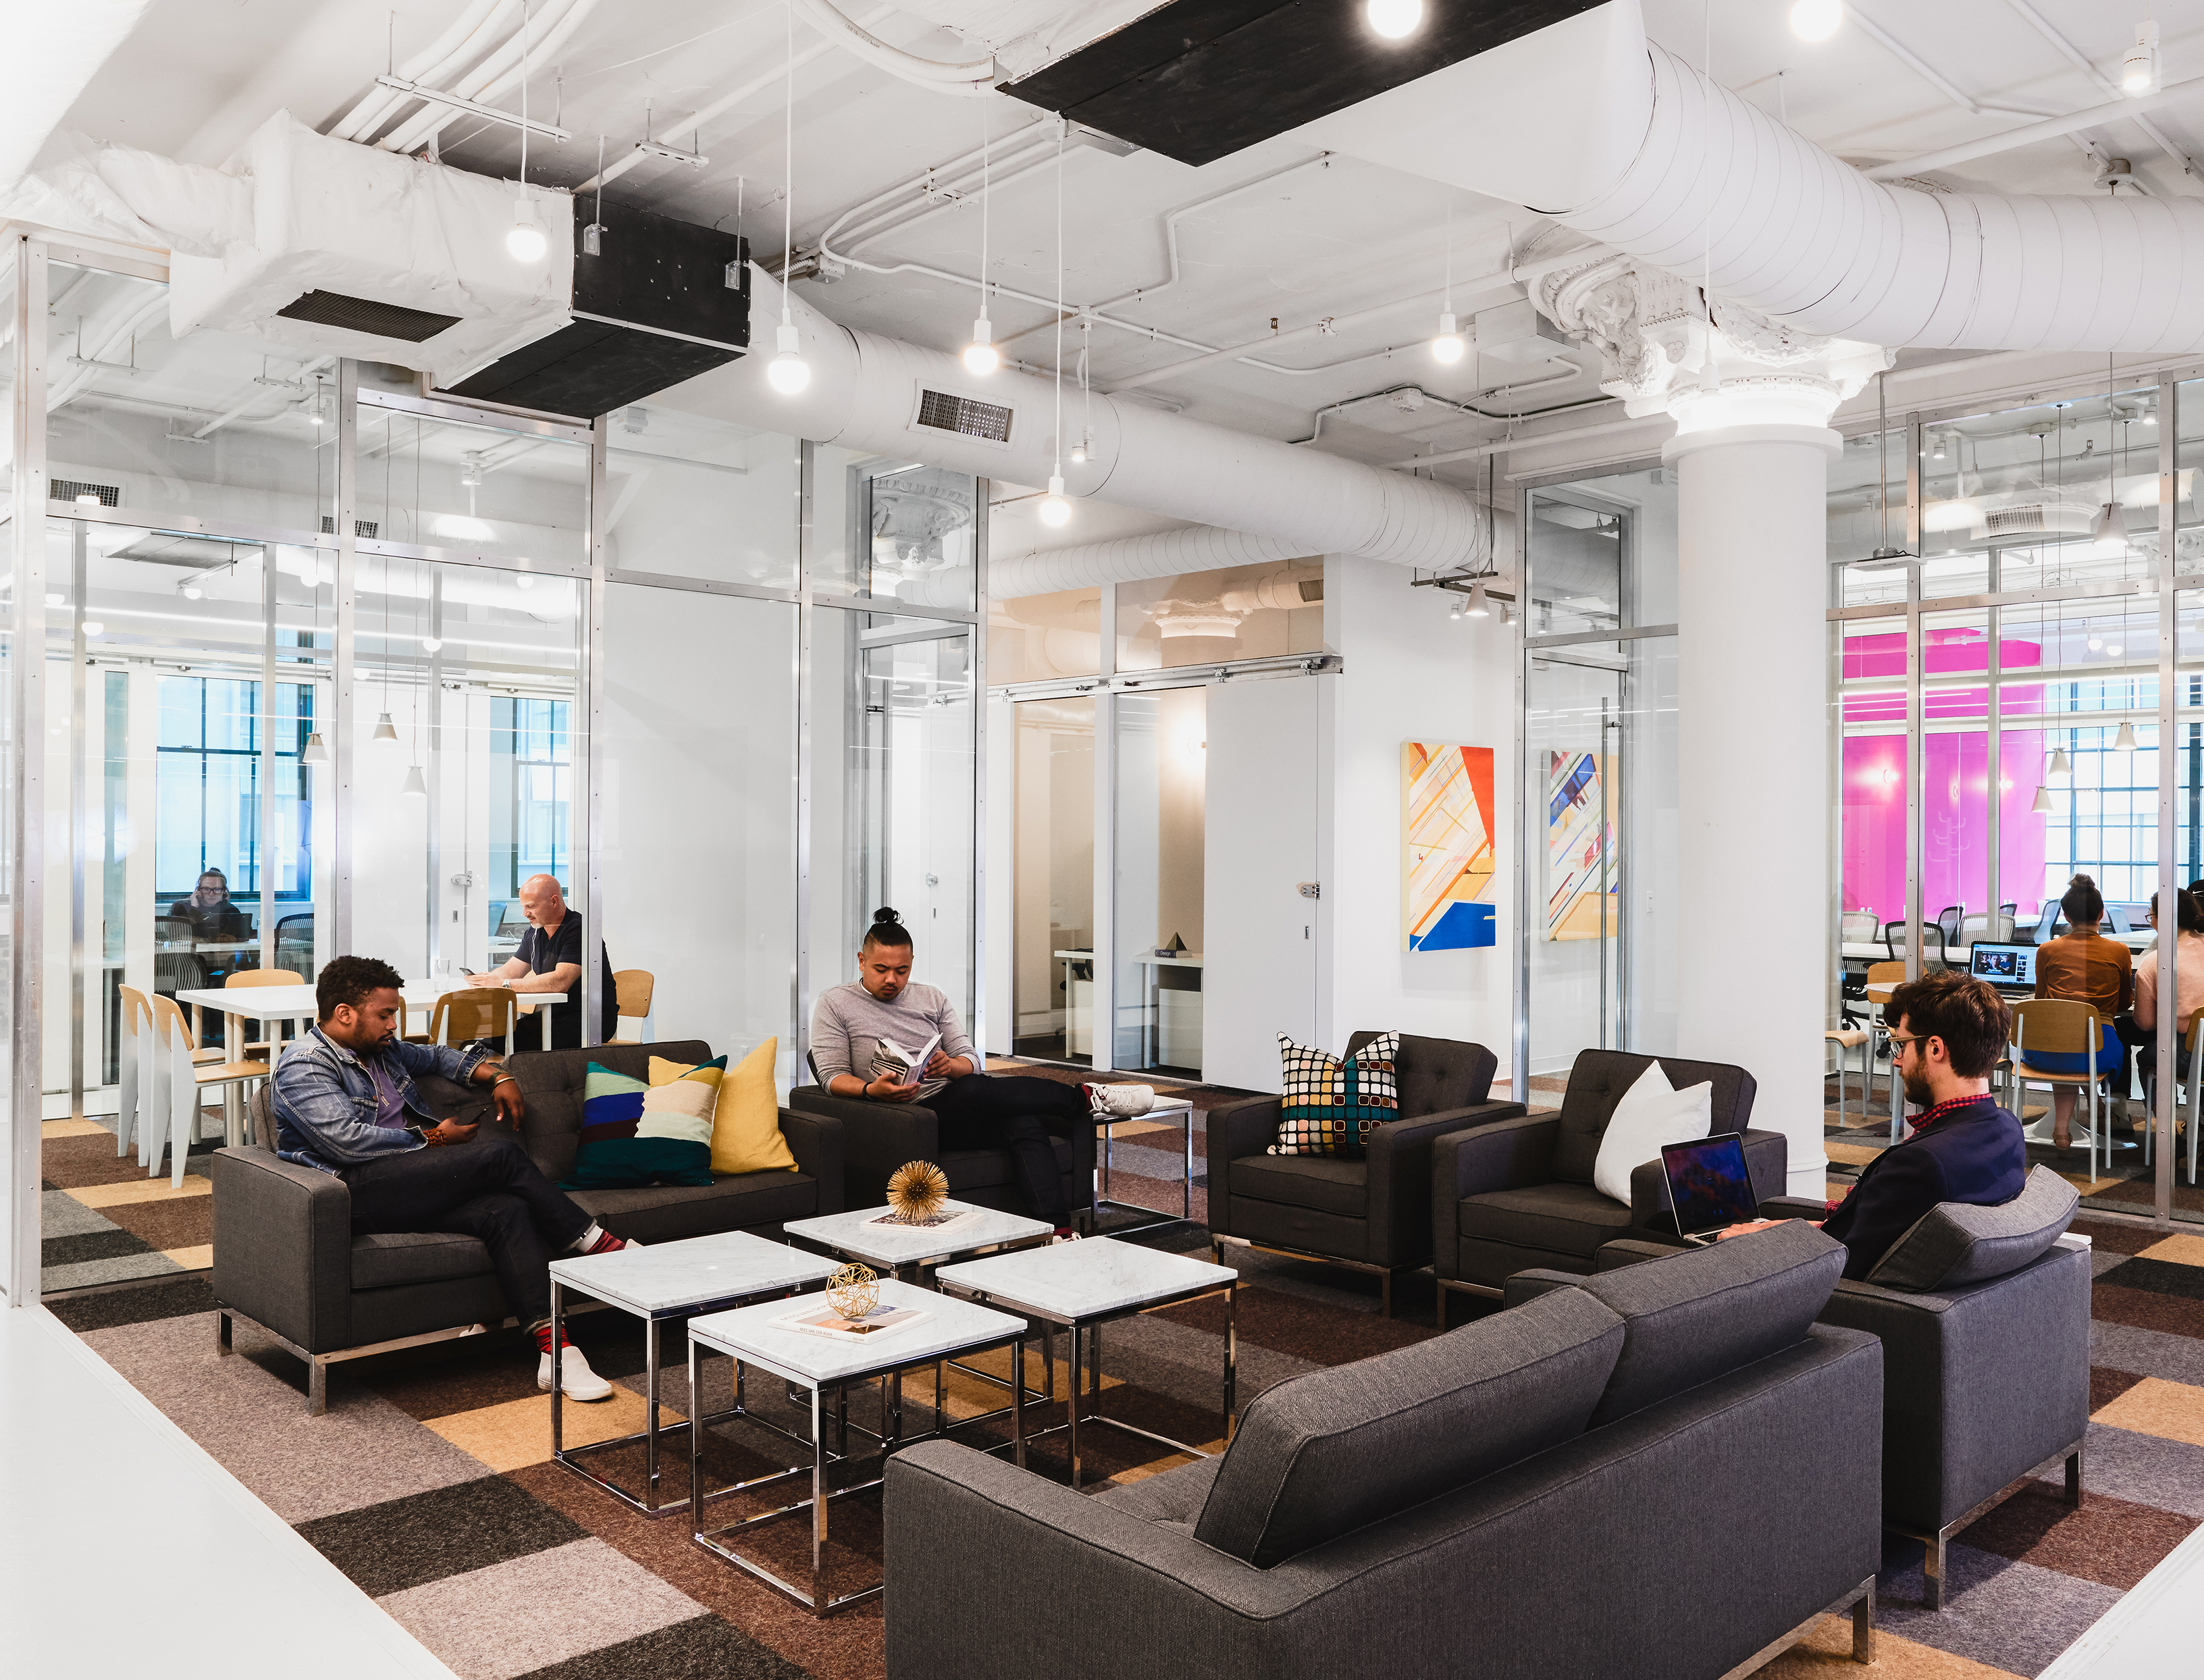 A coworking space with exposed, white ductwork and pillars, and big industrial-sized windows.